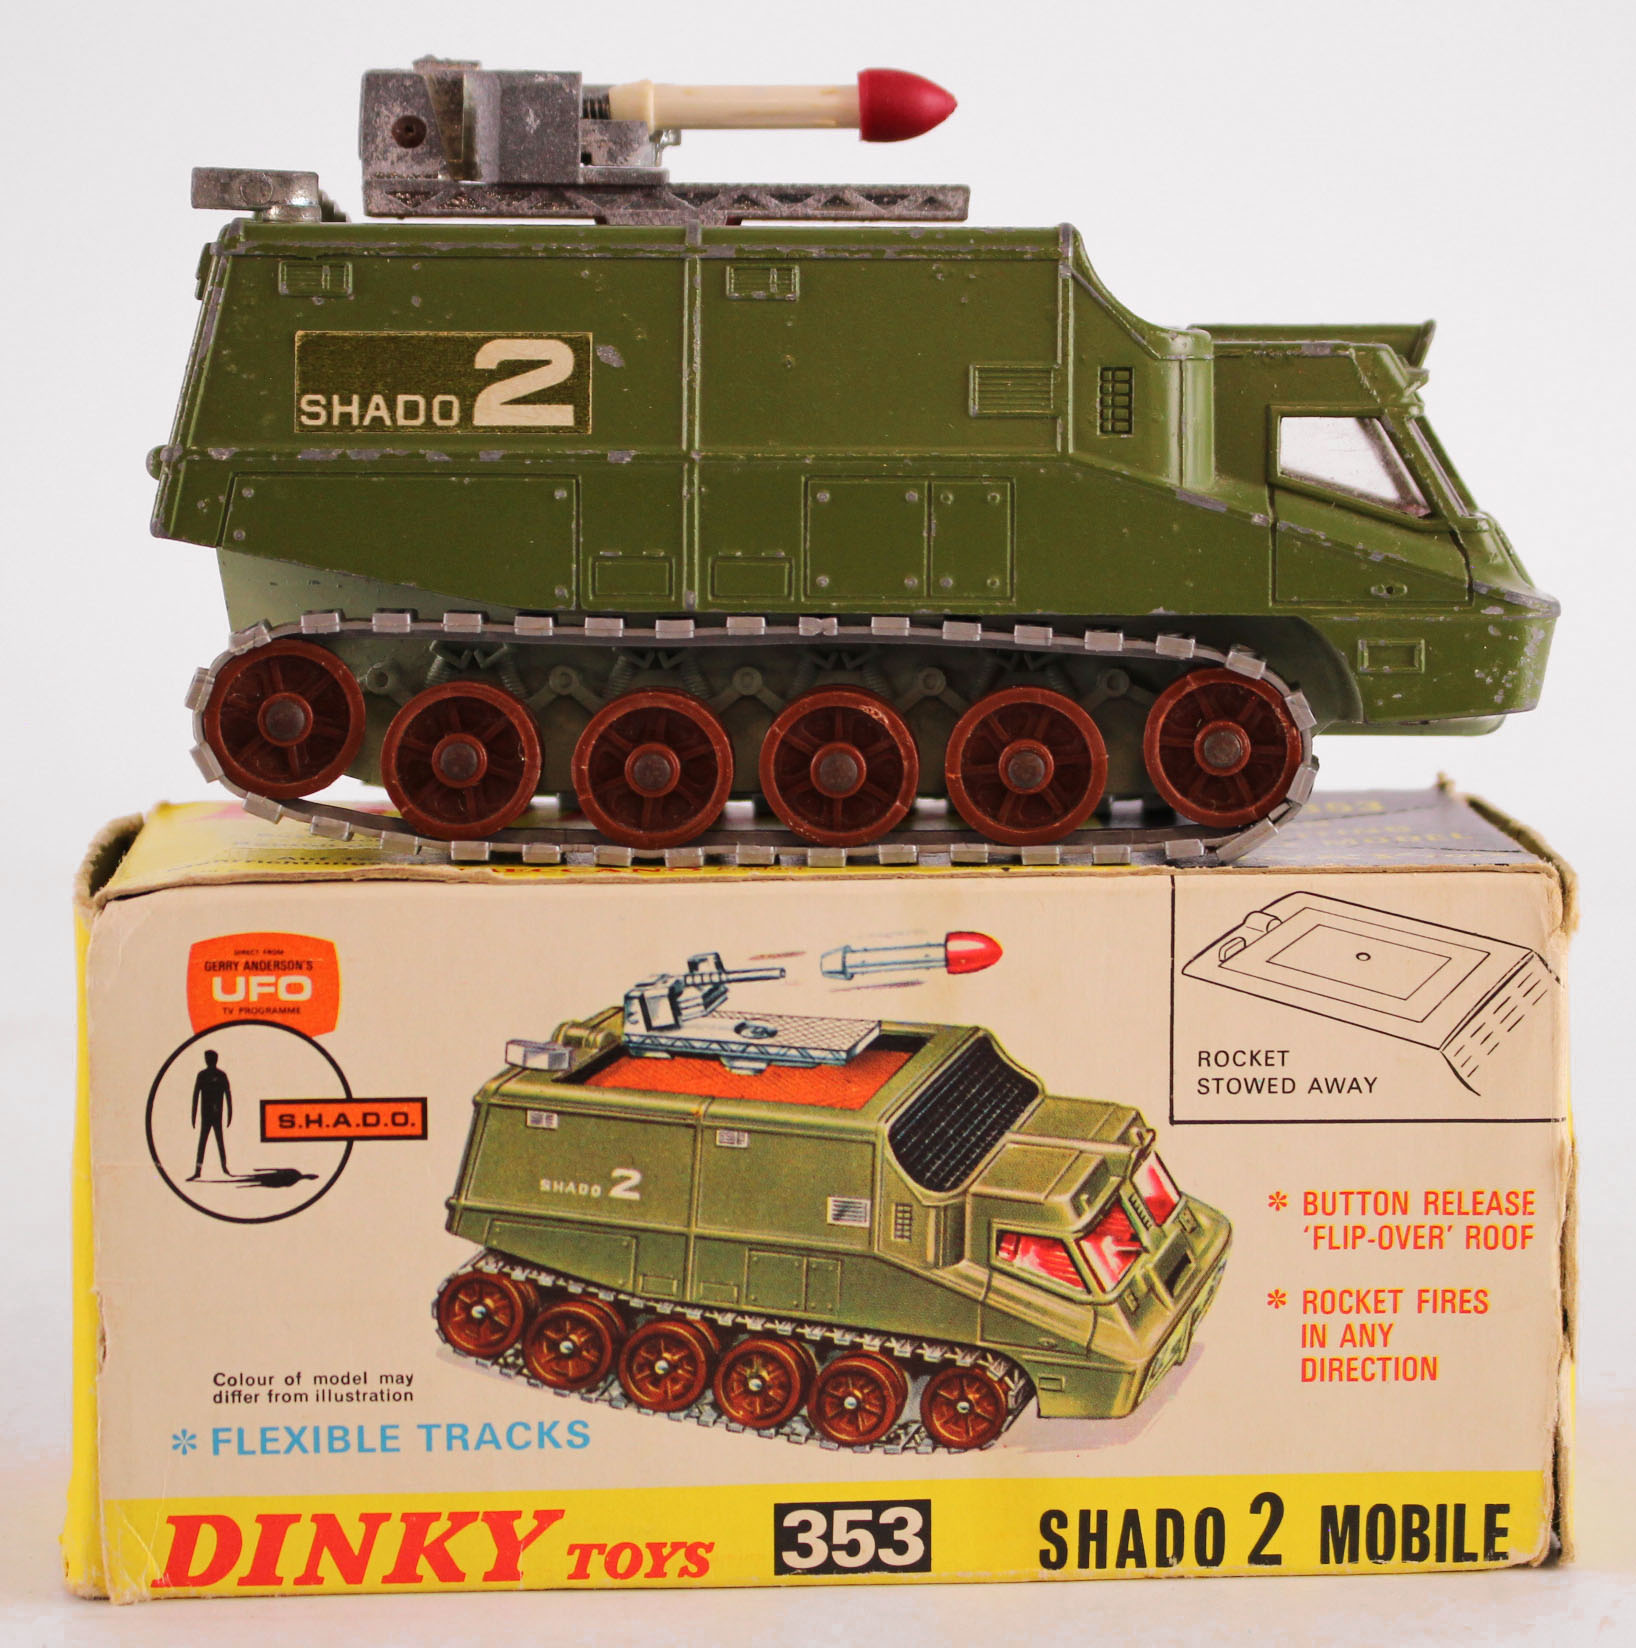 Dinky Toys, no. 353 'Shado 2 Mobile' (Direct From Gerry Andersons UFO), missile present, contained